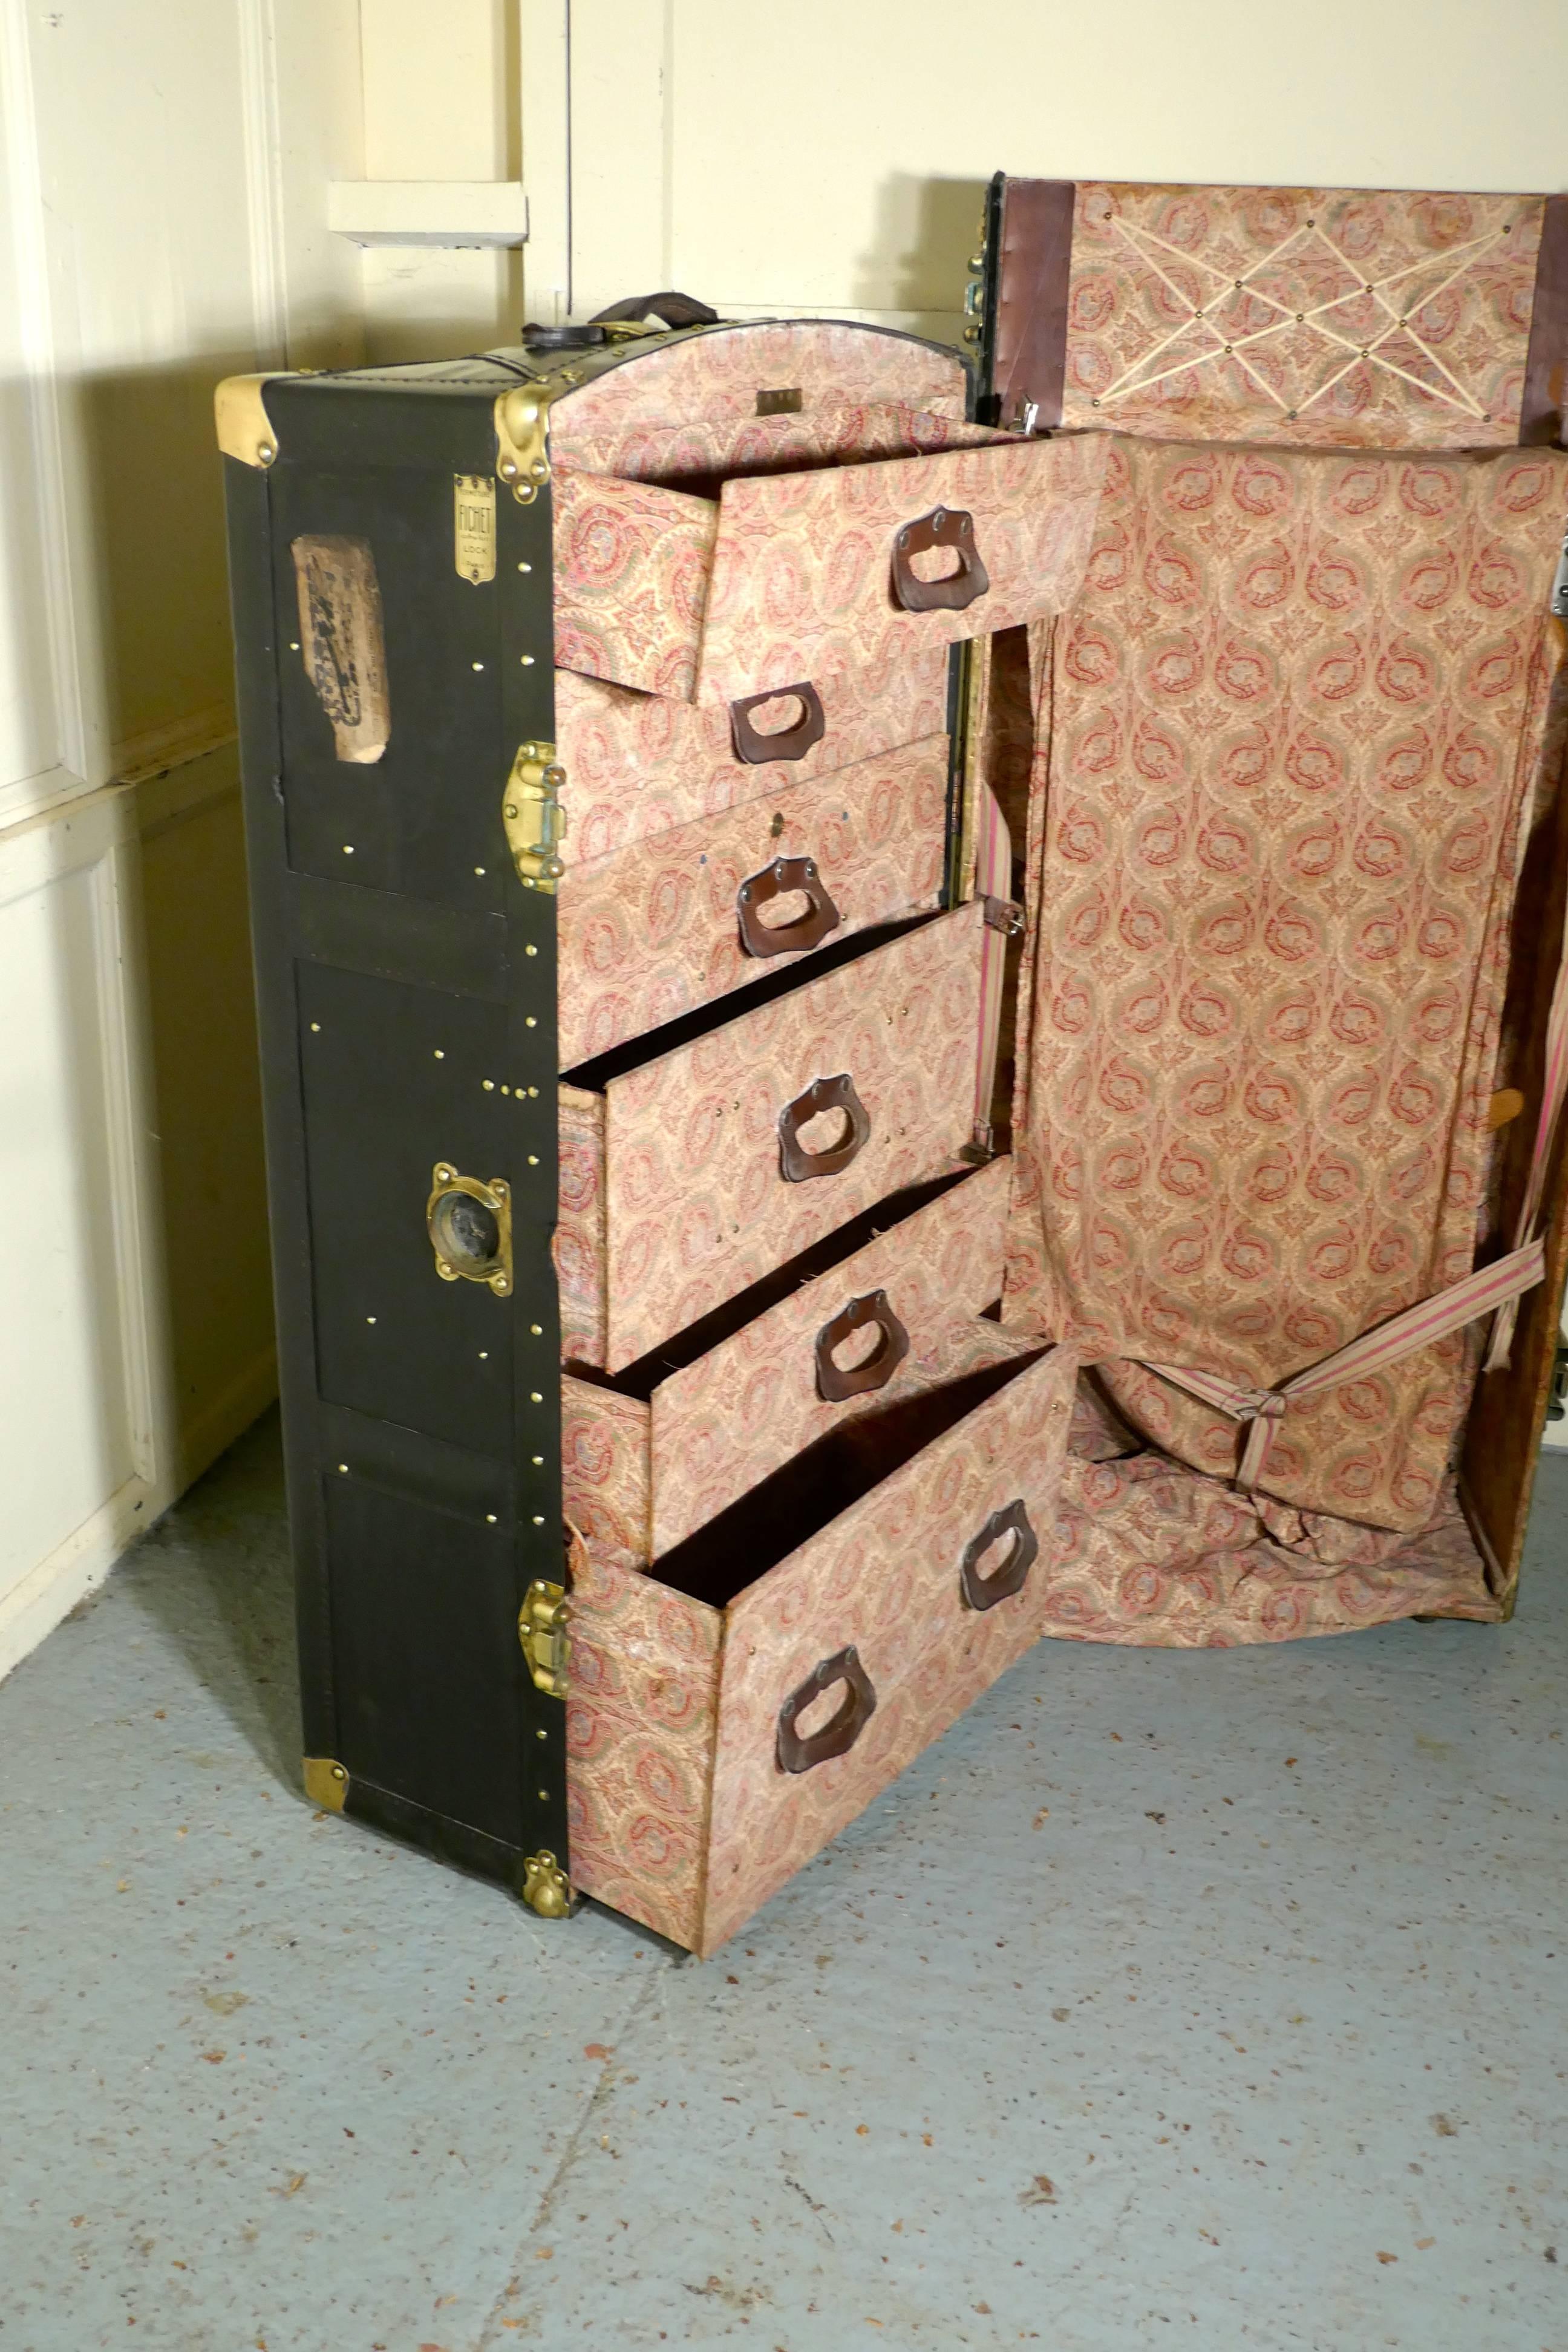 Fitted steamer trunk or cabin wardrobe, Portmanteau by Fichet

A superb piece of history dating back to the time when your luggage would be taken to your cabin. This one is leather, brass bound studded and it is domed at the top
The trunk opens